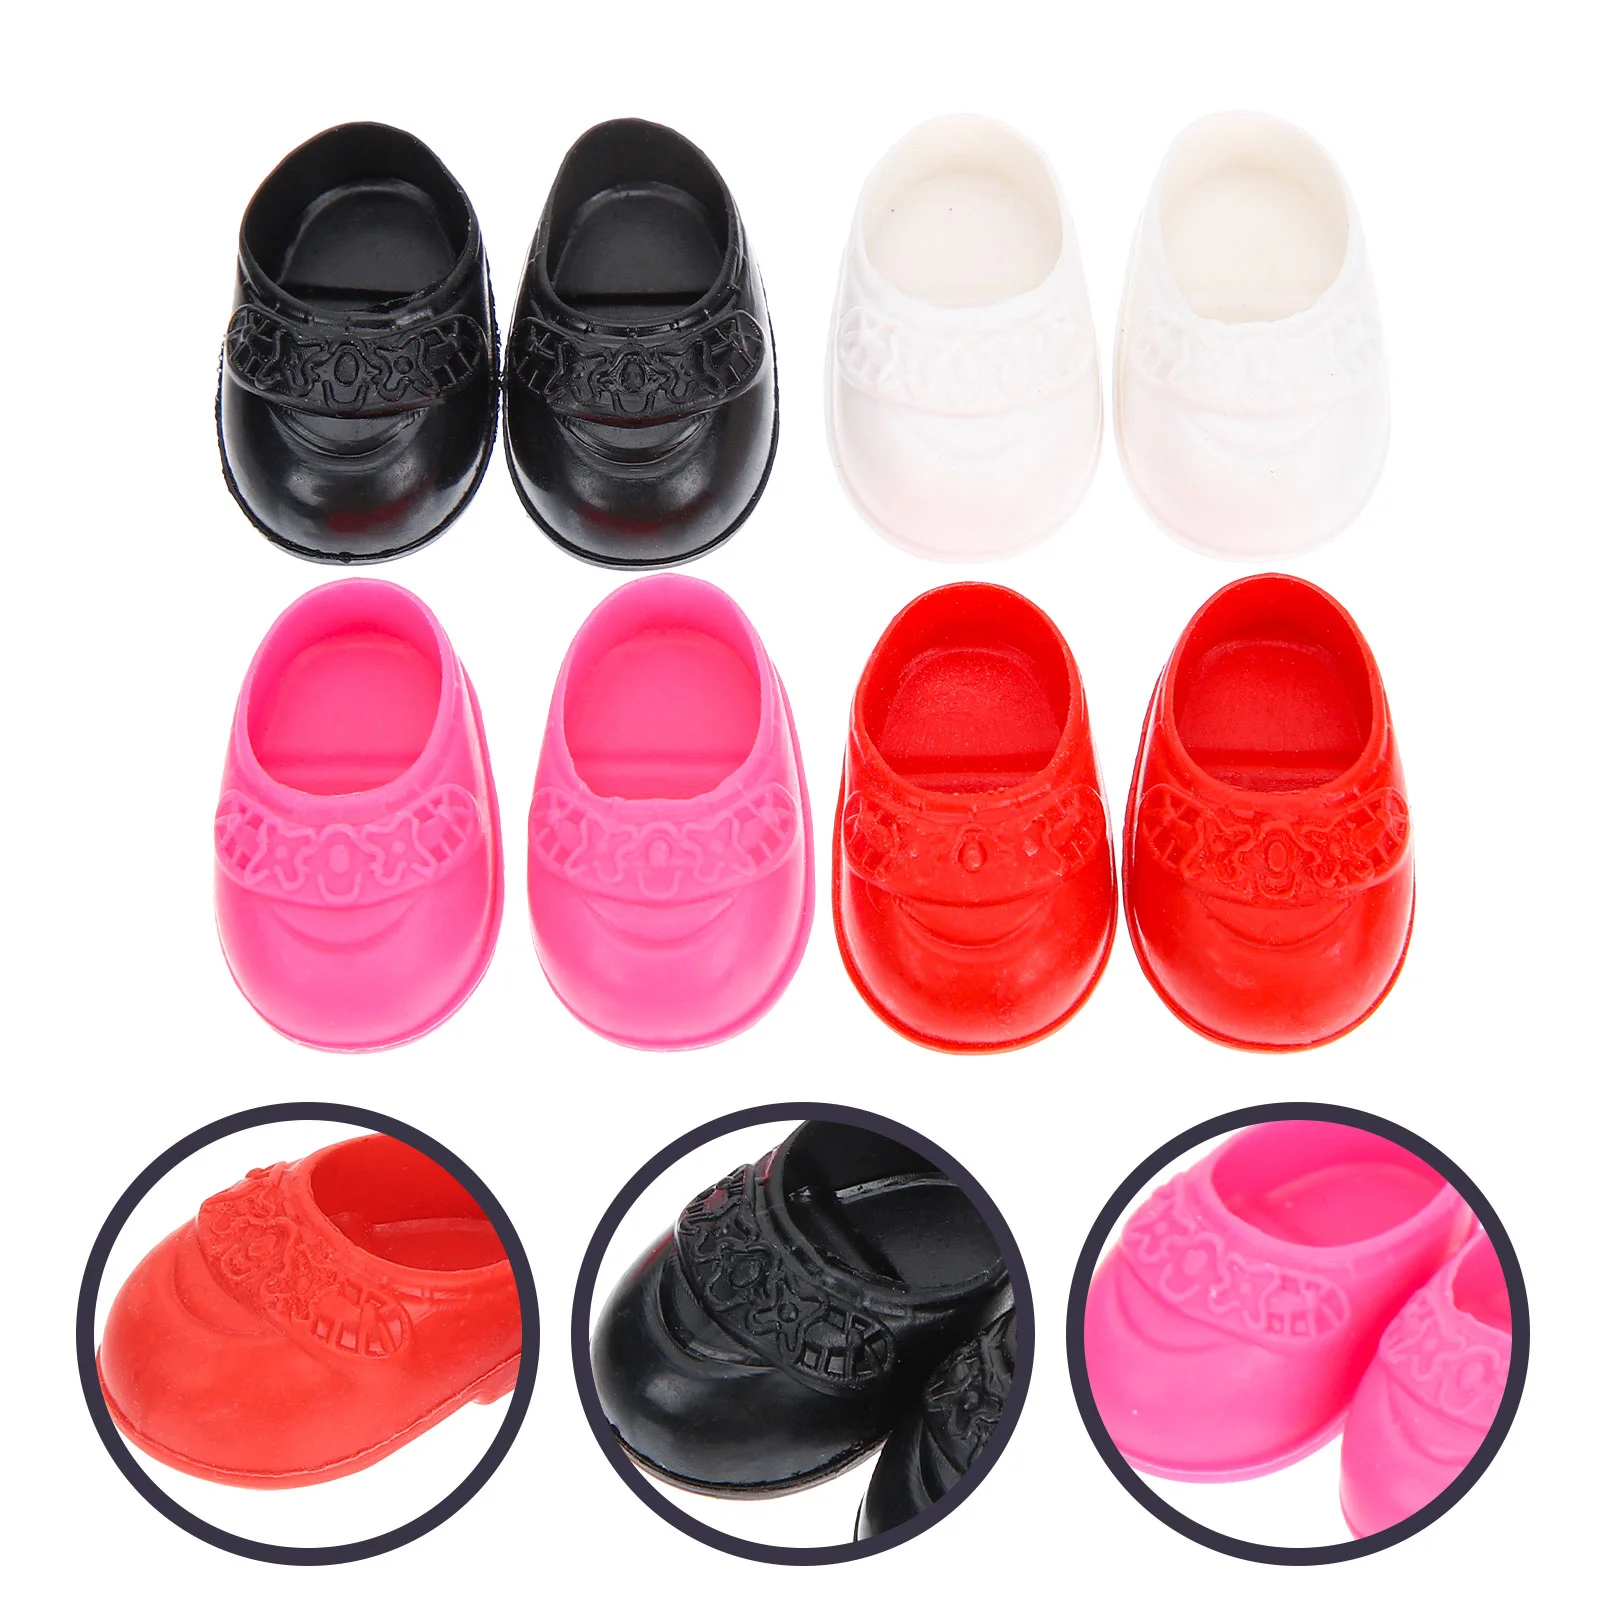 

4 Pairs Shoes Miniature Simulation Shoes Girl Toy Supplies